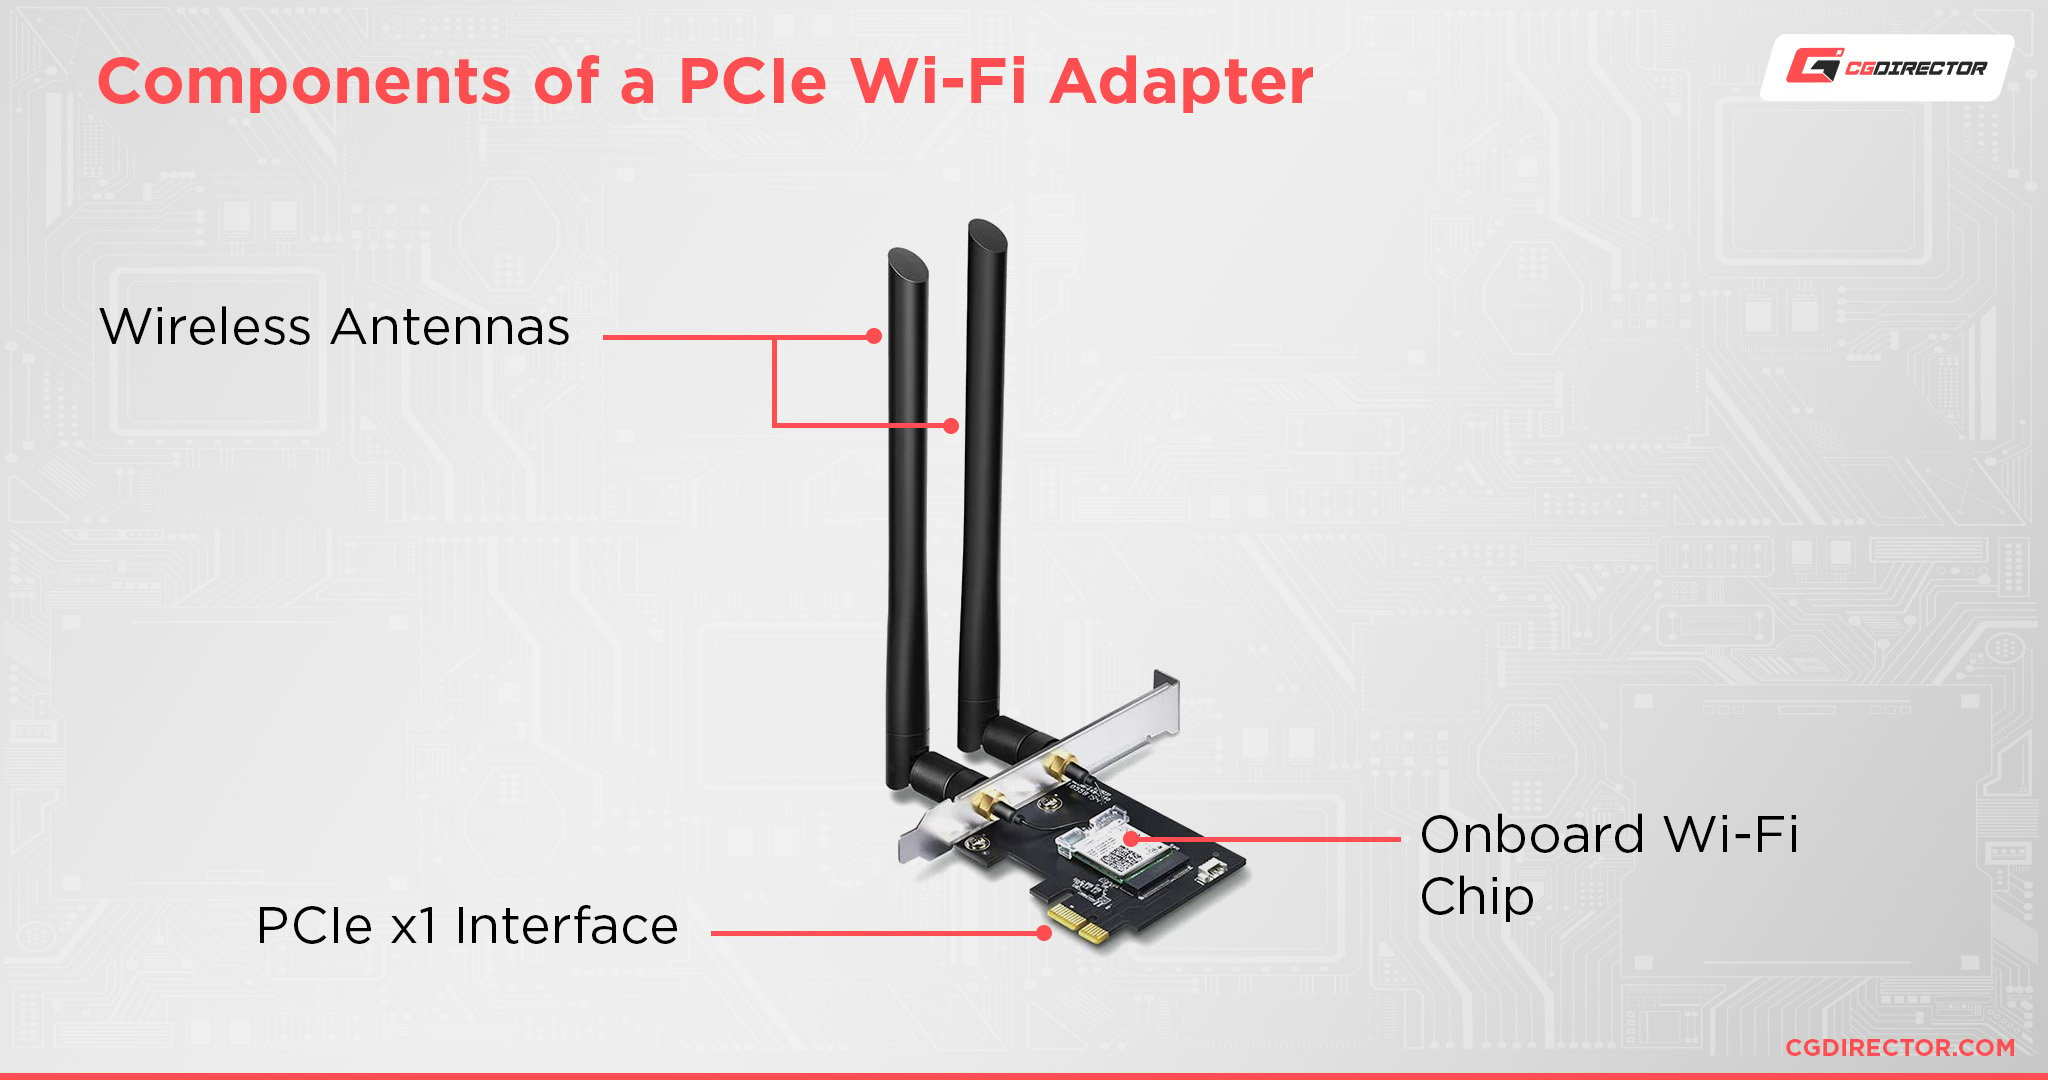 Components of a PCIe Wi-Fi Adapter